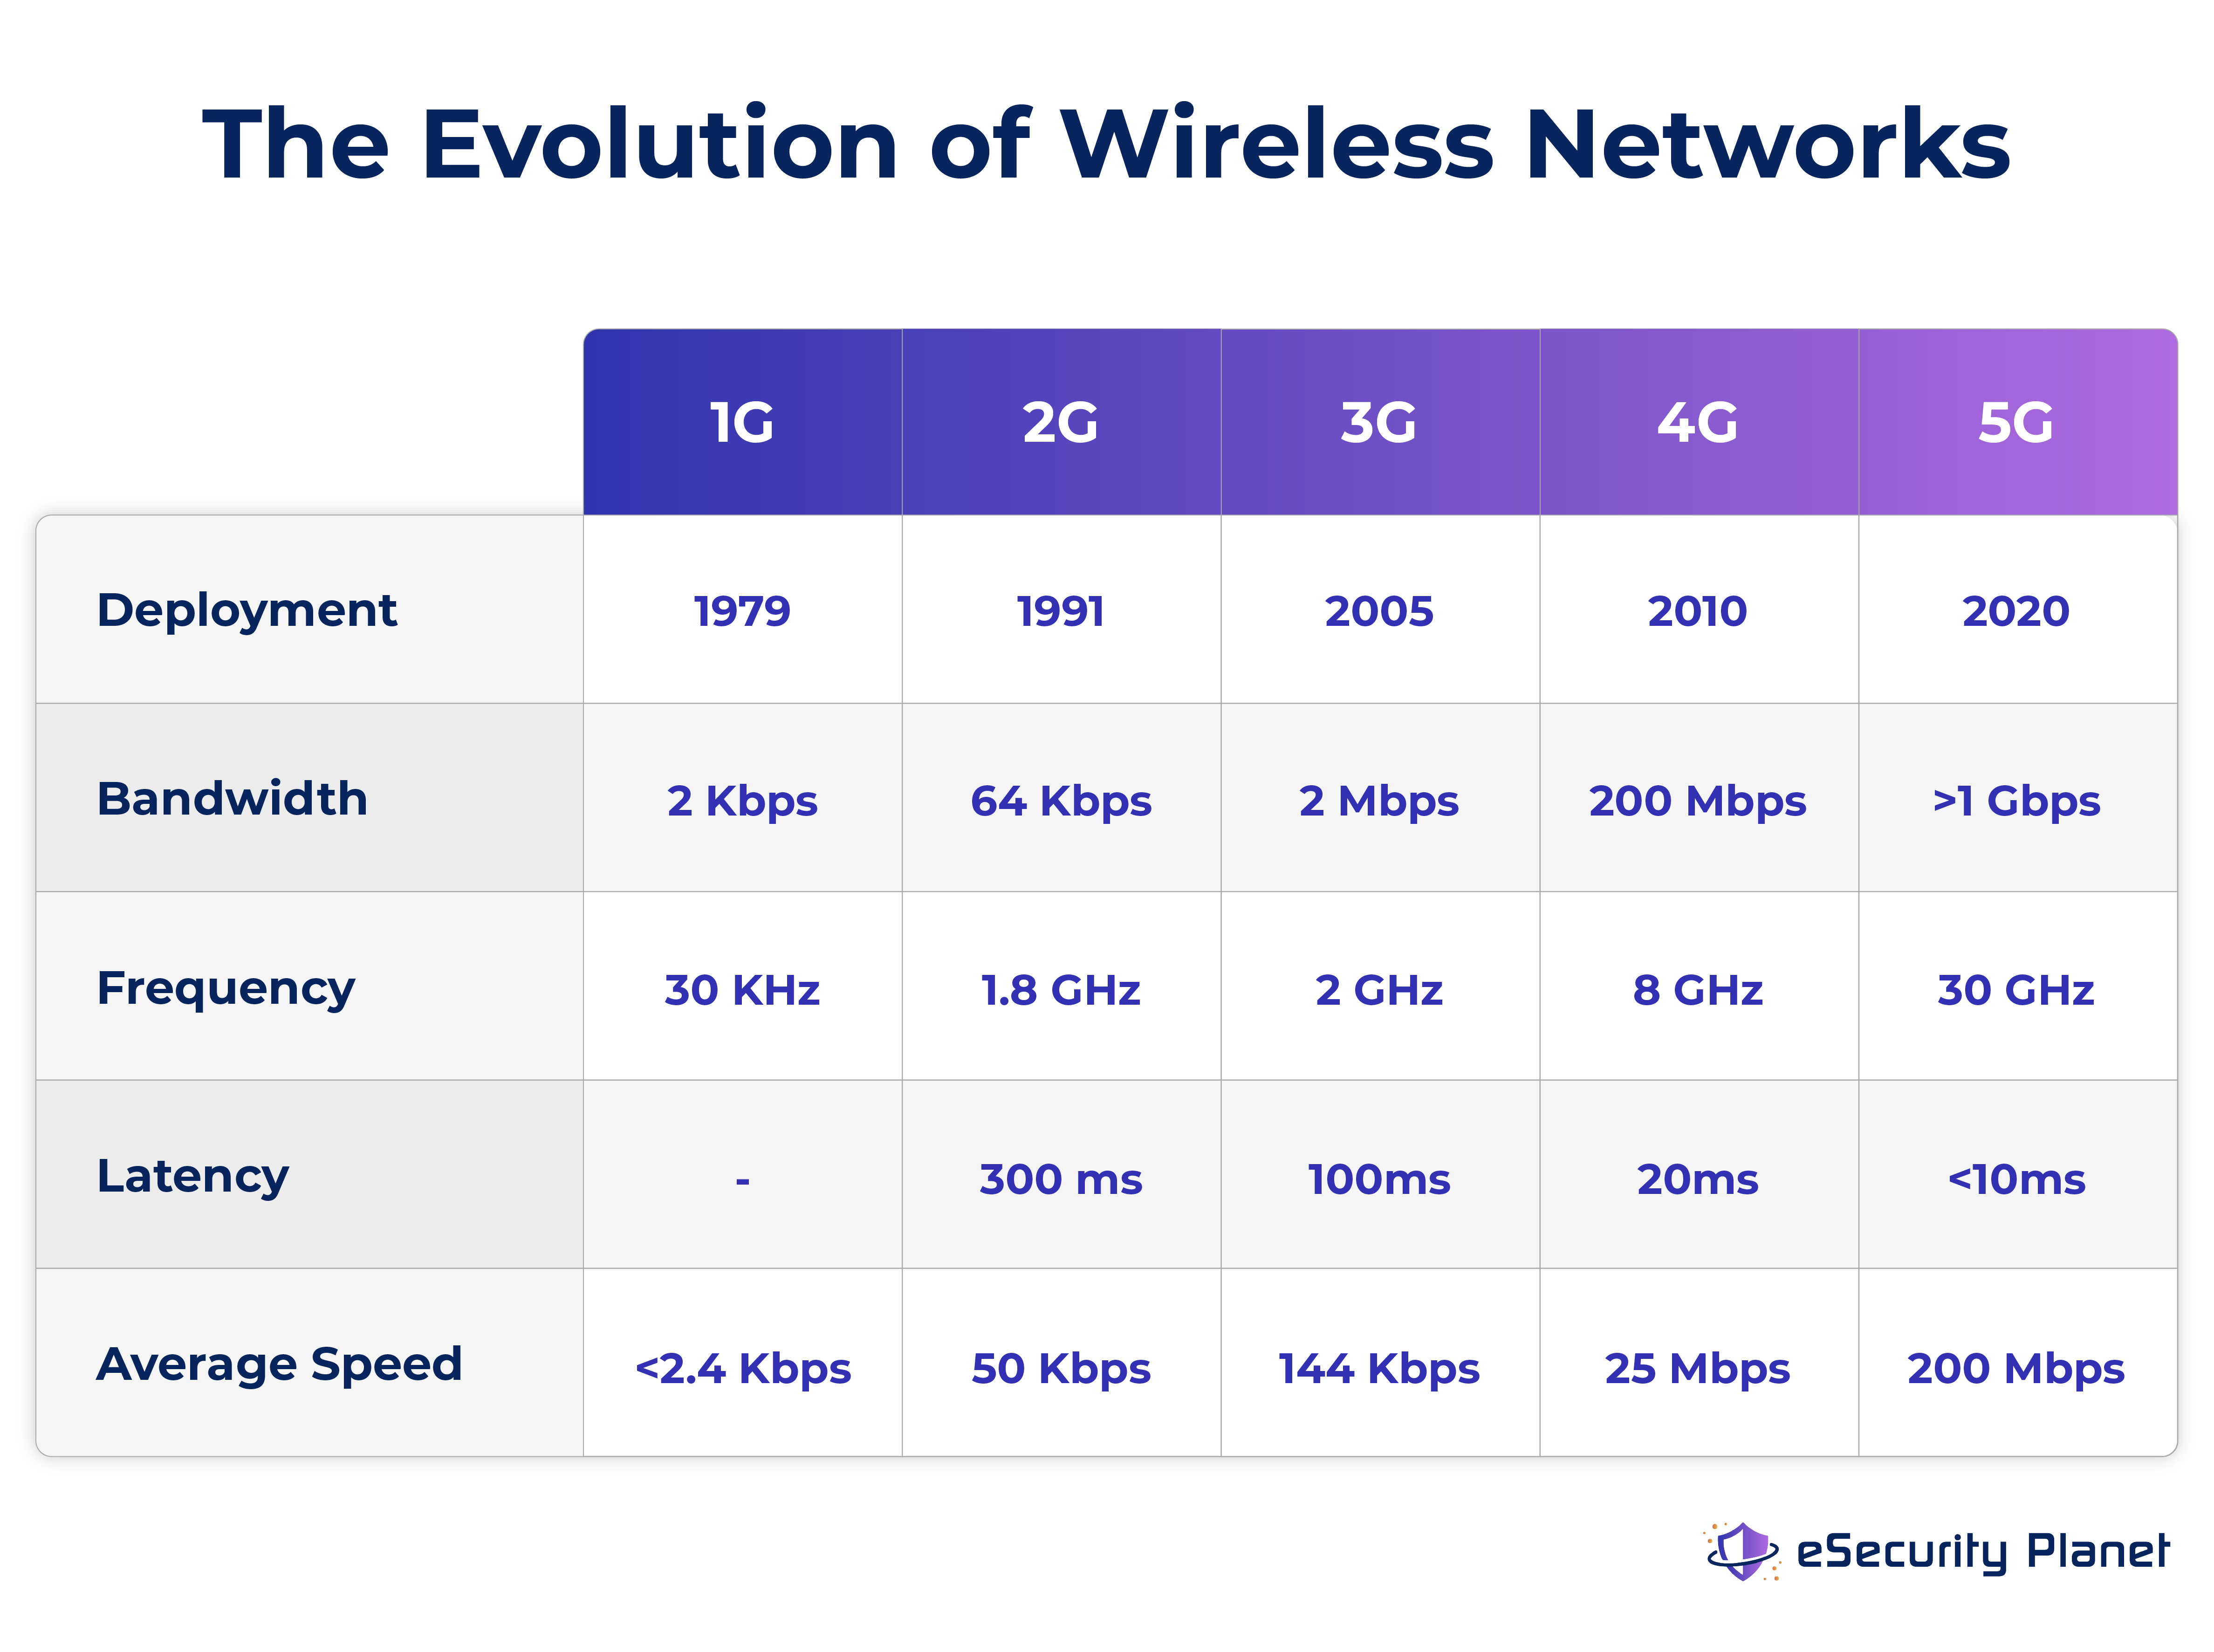 A graphic showing how wireless networks evolved over the years in terms of bandwidth, frequency, latency, and average speed. 5G is the newest generation of telecommunication networks for wireless devices.